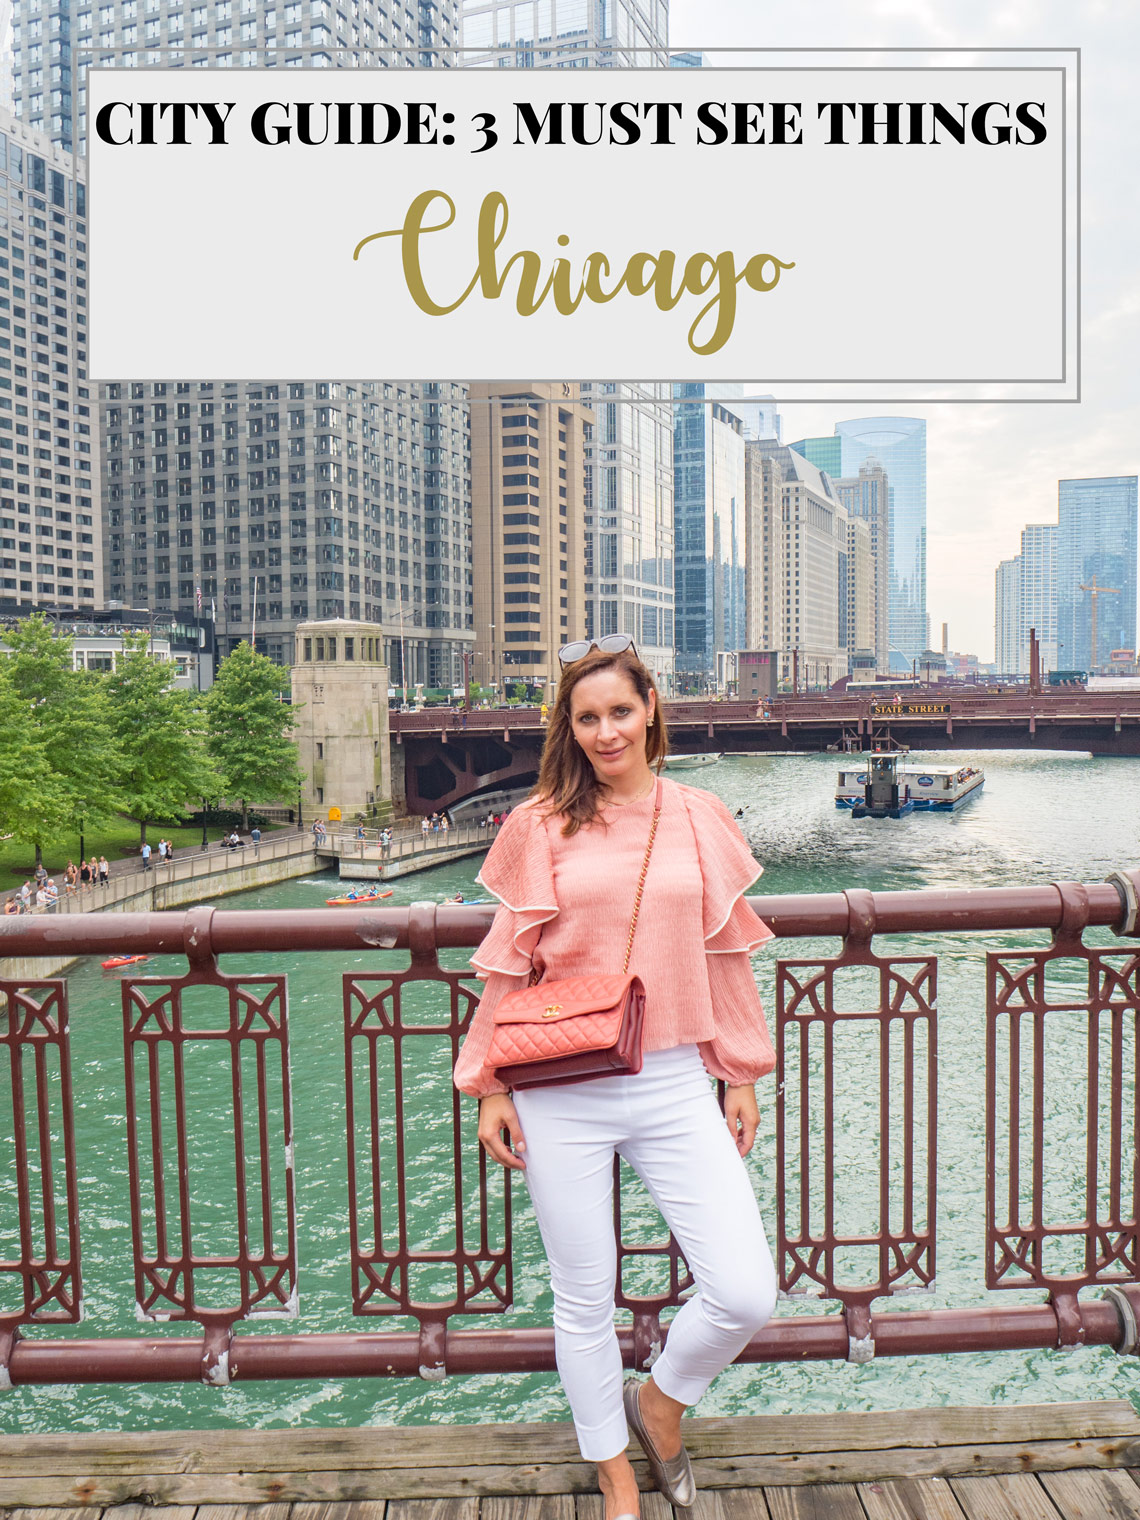 3 must see things in Chicago by Chic Journal